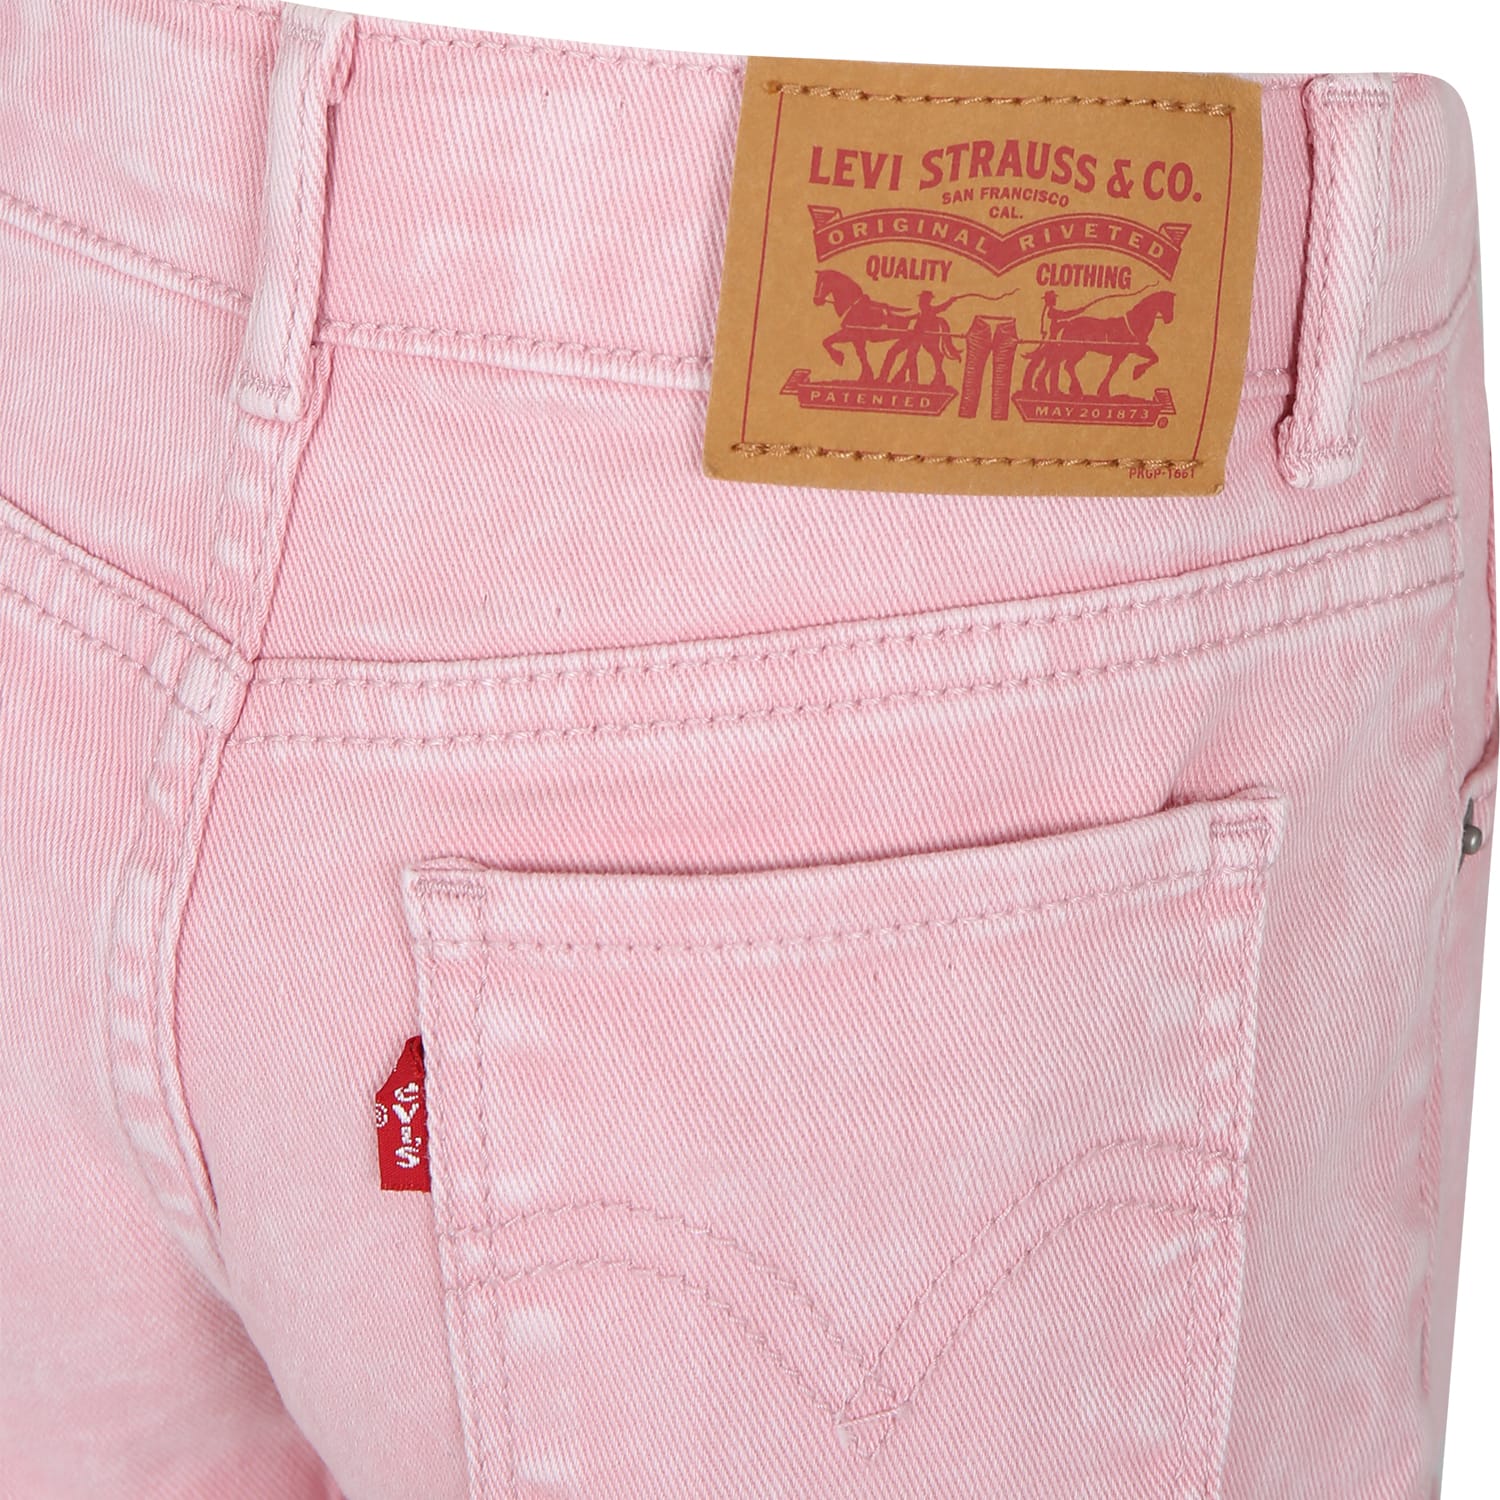 Shop Levi's Pink Shorts For Girl With Logo